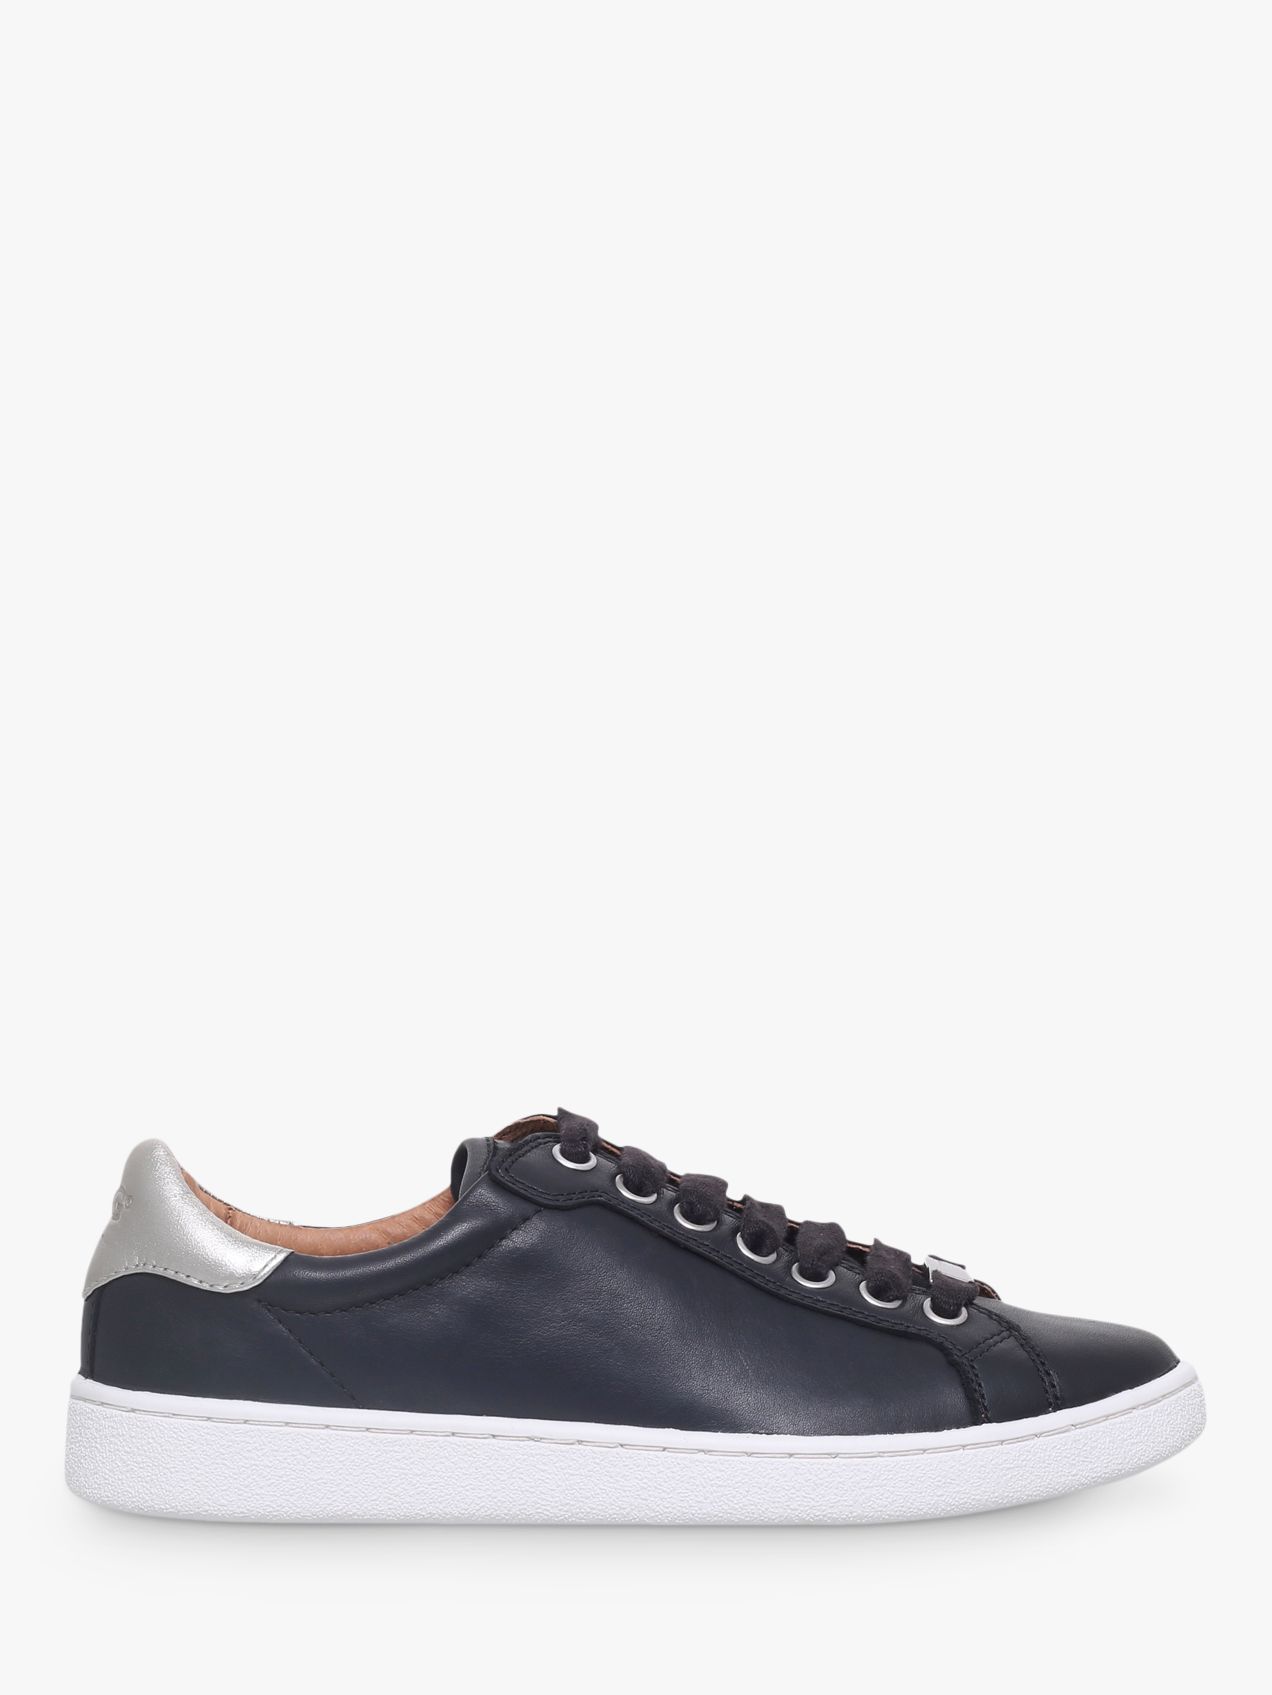 UGG Milo Lace Up Trainers, Black Leather